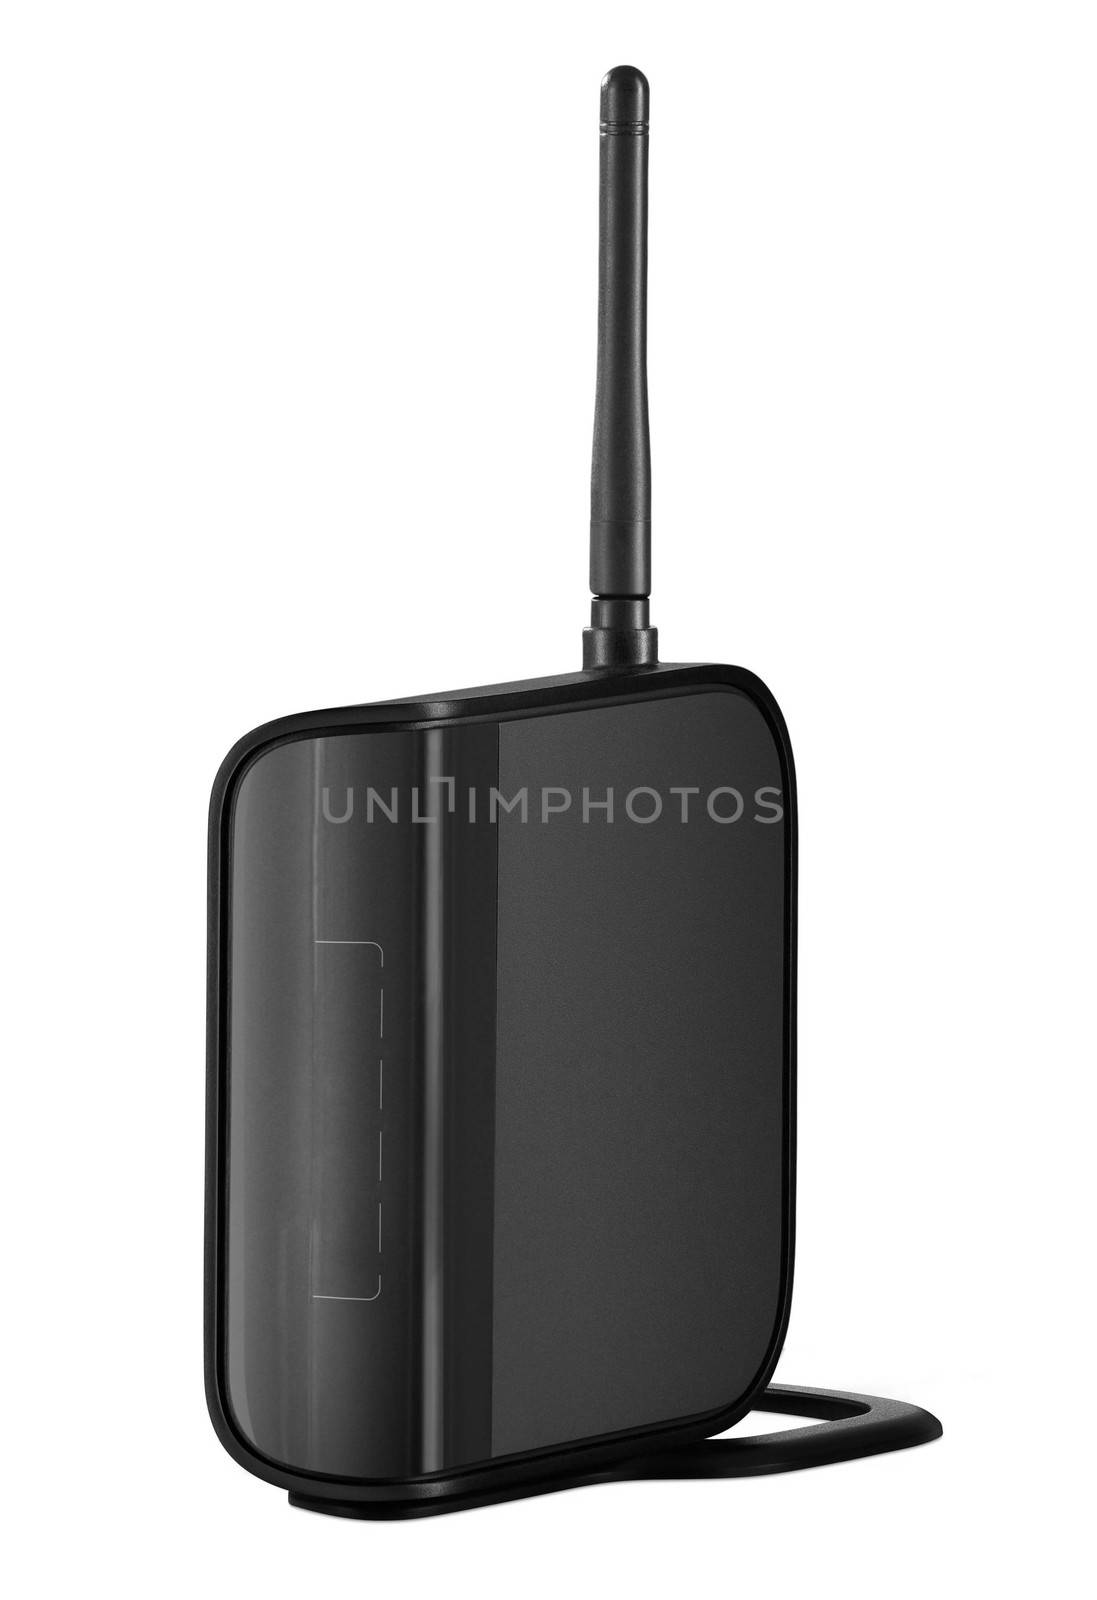 Wireless router in isolated white background